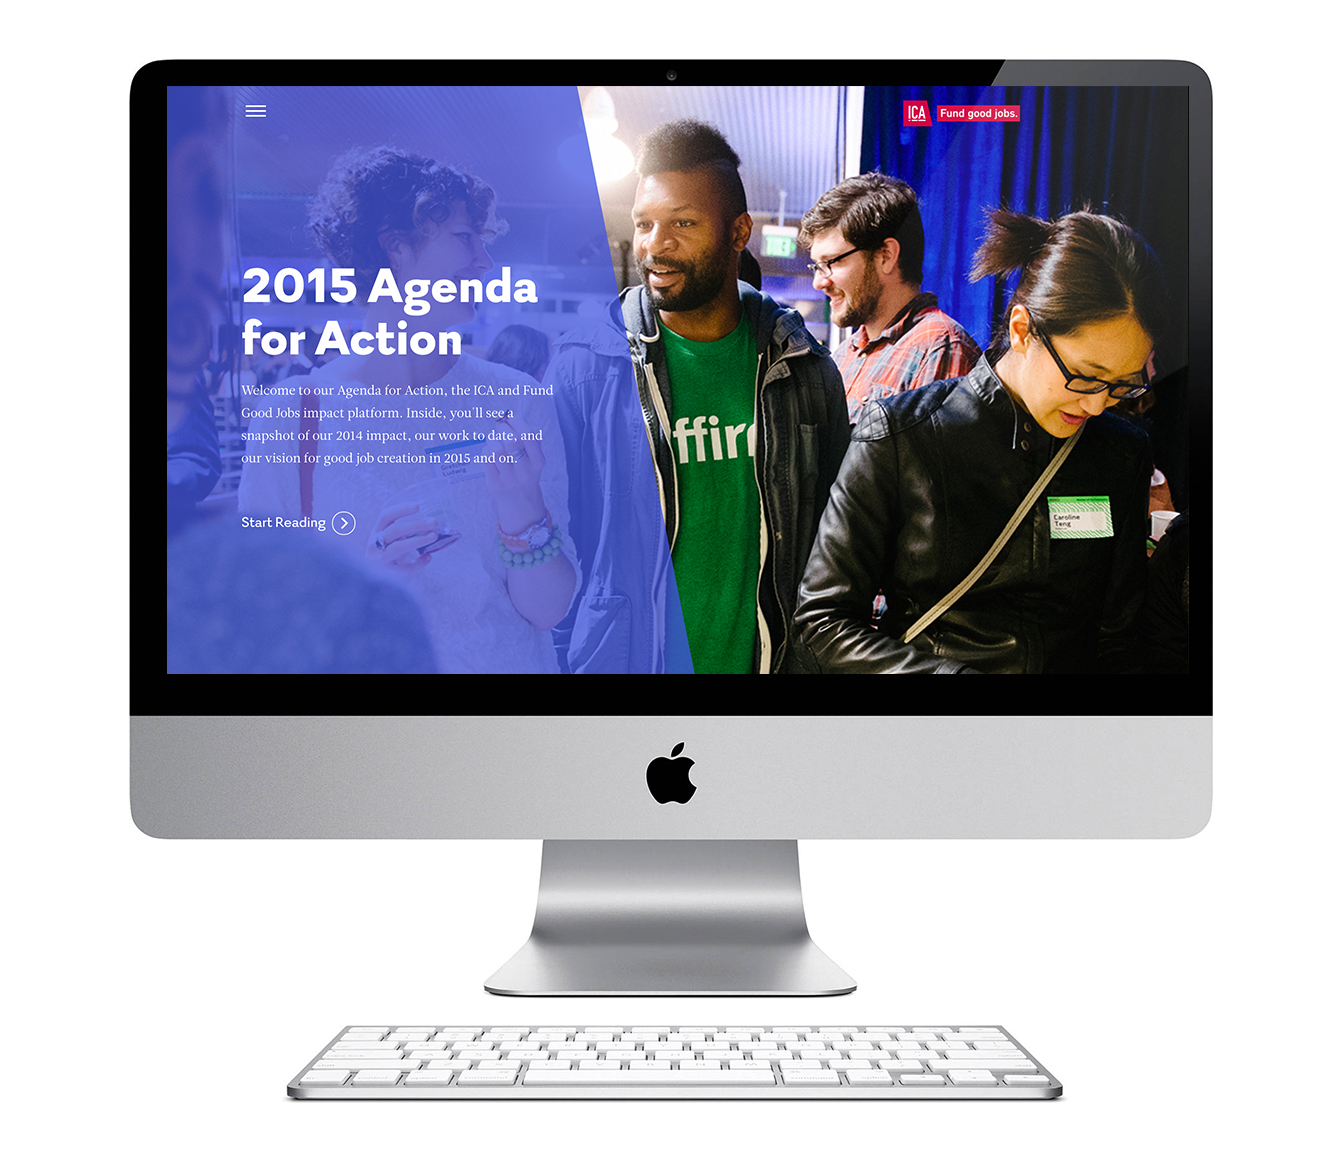 fire-lite_client-page_2015_ICA-agenda-for-action_image-1_672x585px@2x